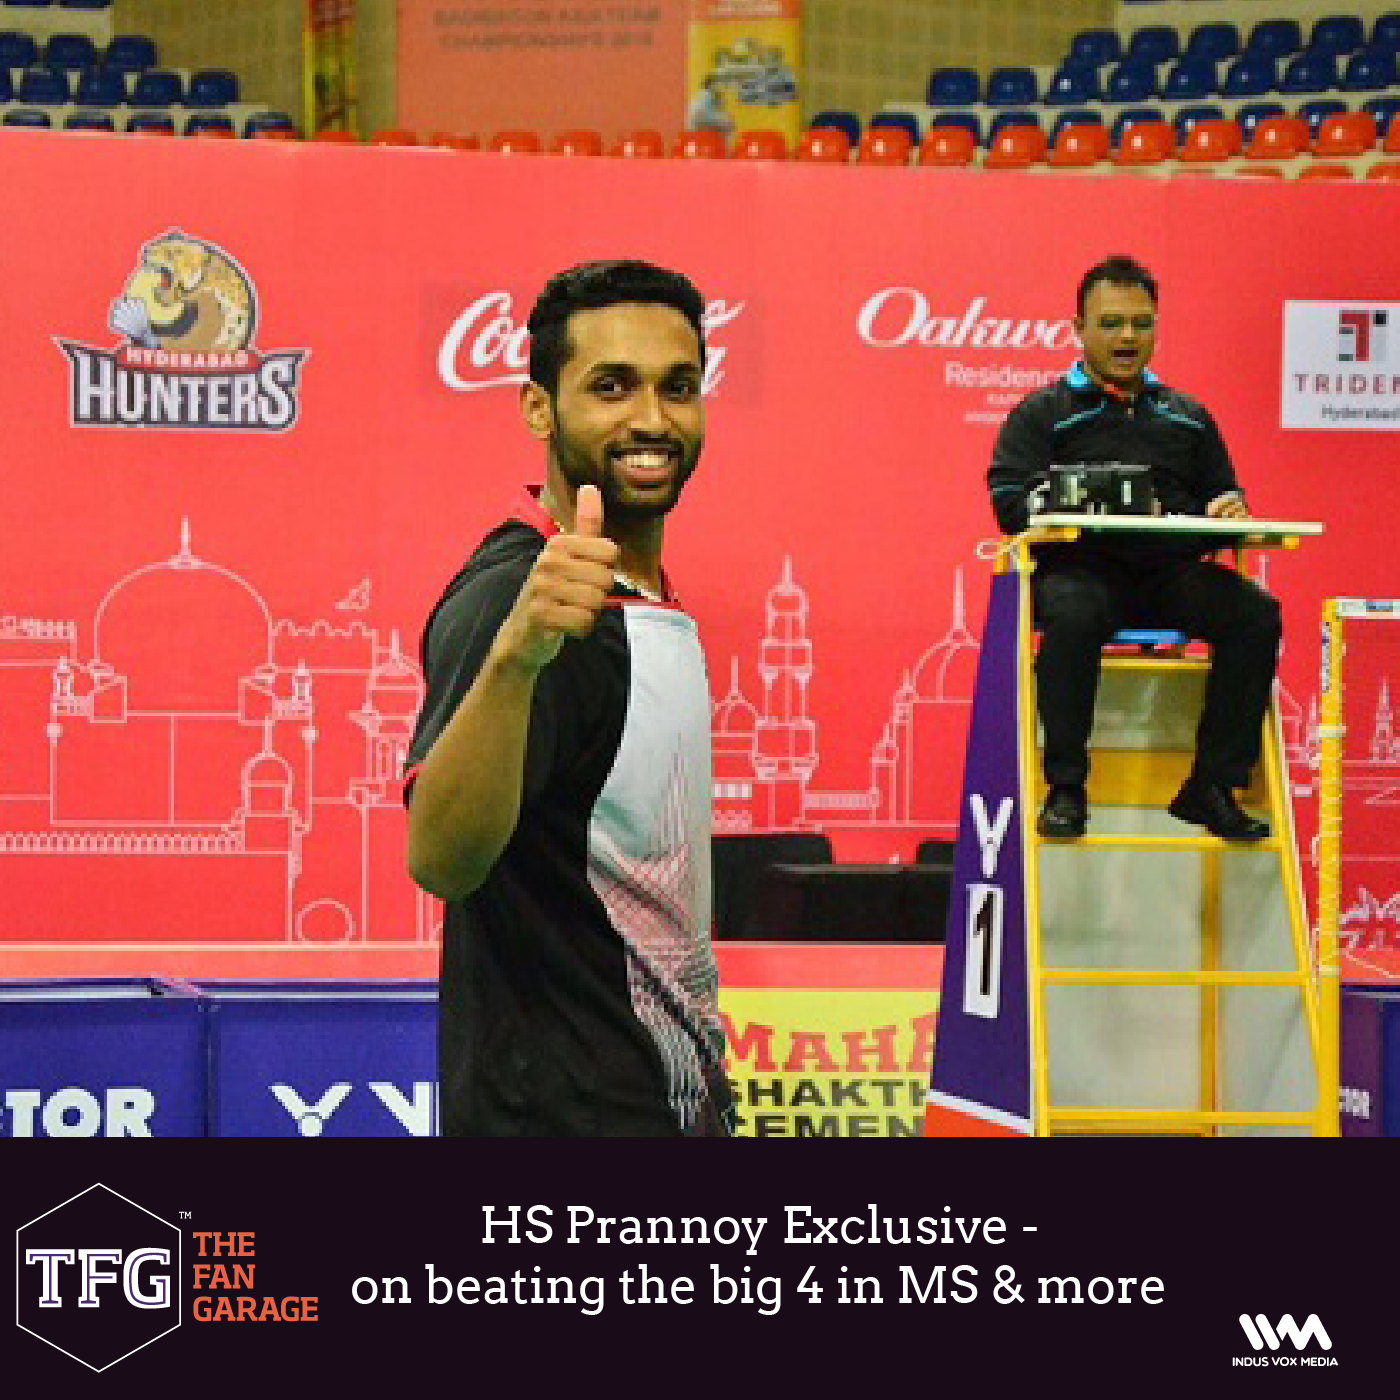 TFG interviews Ep. 027: HS Prannoy Exclusive - on beating the big 4 in MS & more